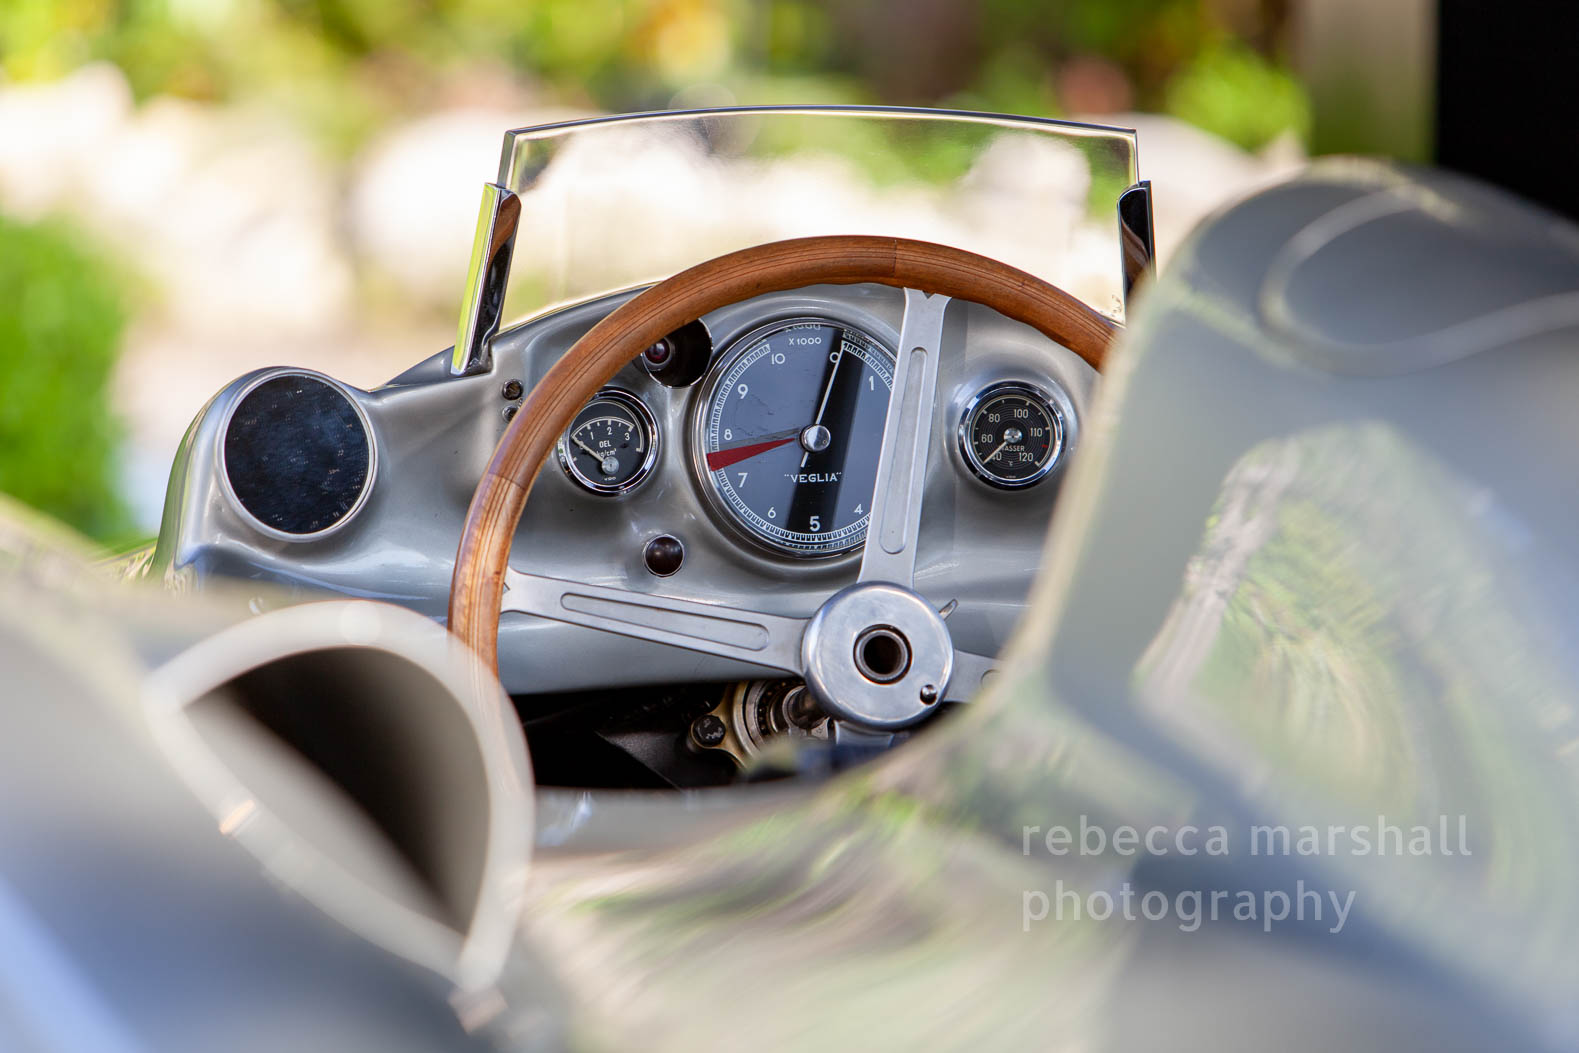 Close-up photograph of the dashboard of a vintage racing car